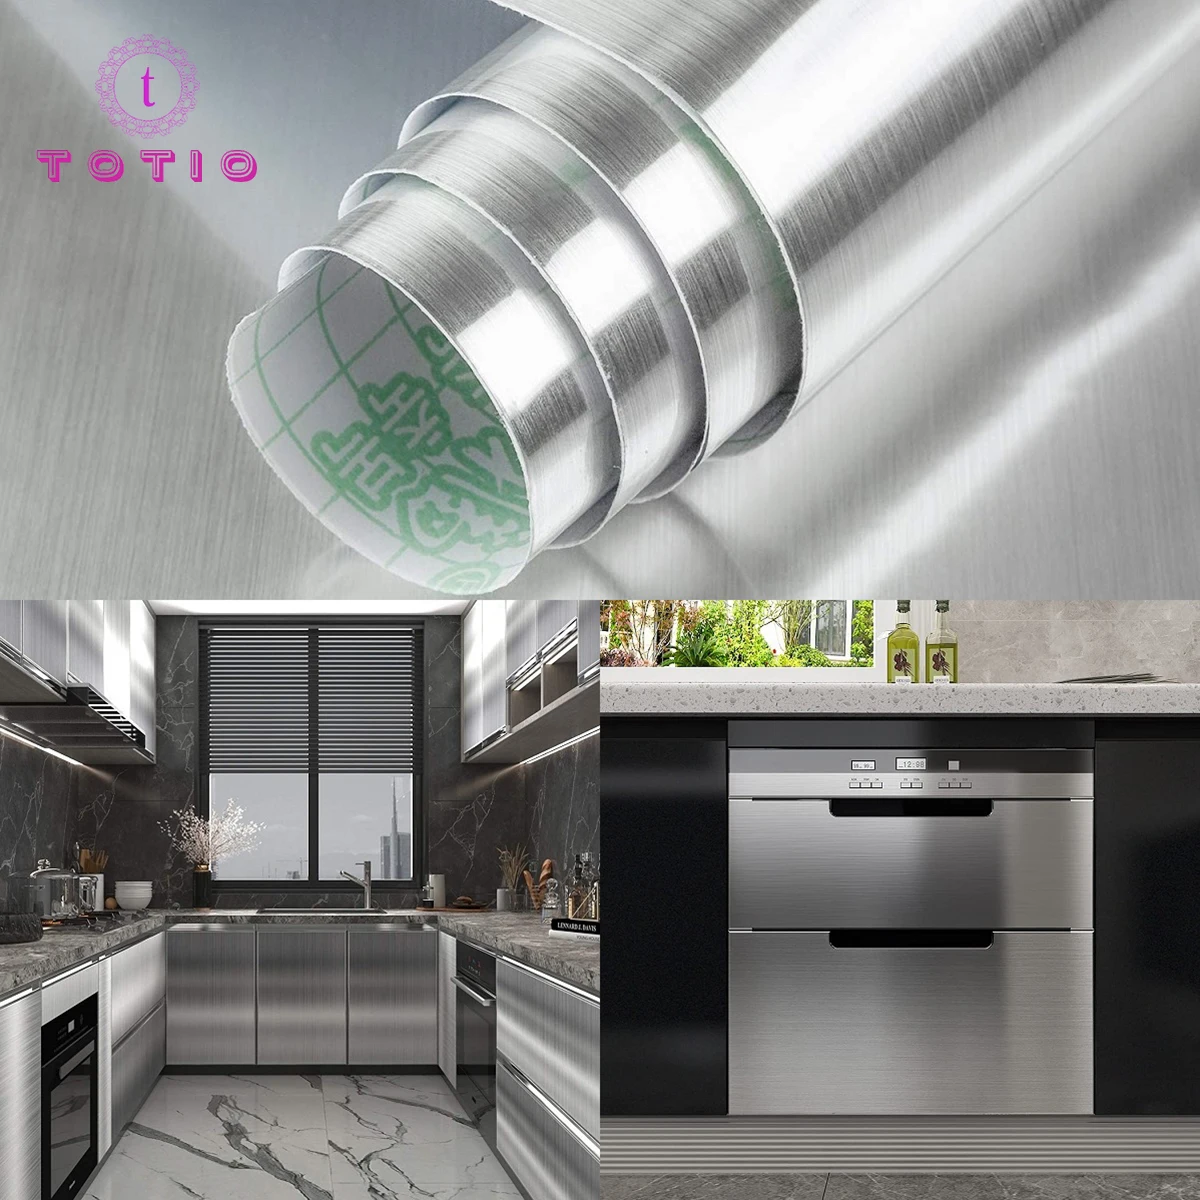 TOTIO Waterproof Silver Wallpaper Self Adhesive Stainless Steel Wallpaper Heat Resistance Vinyl Oilproof House Appliance Kitchen carnival shopping festival promotion brushed gold kitchen faucet lead free 304 stainless steel cold hot water sink faucet tap